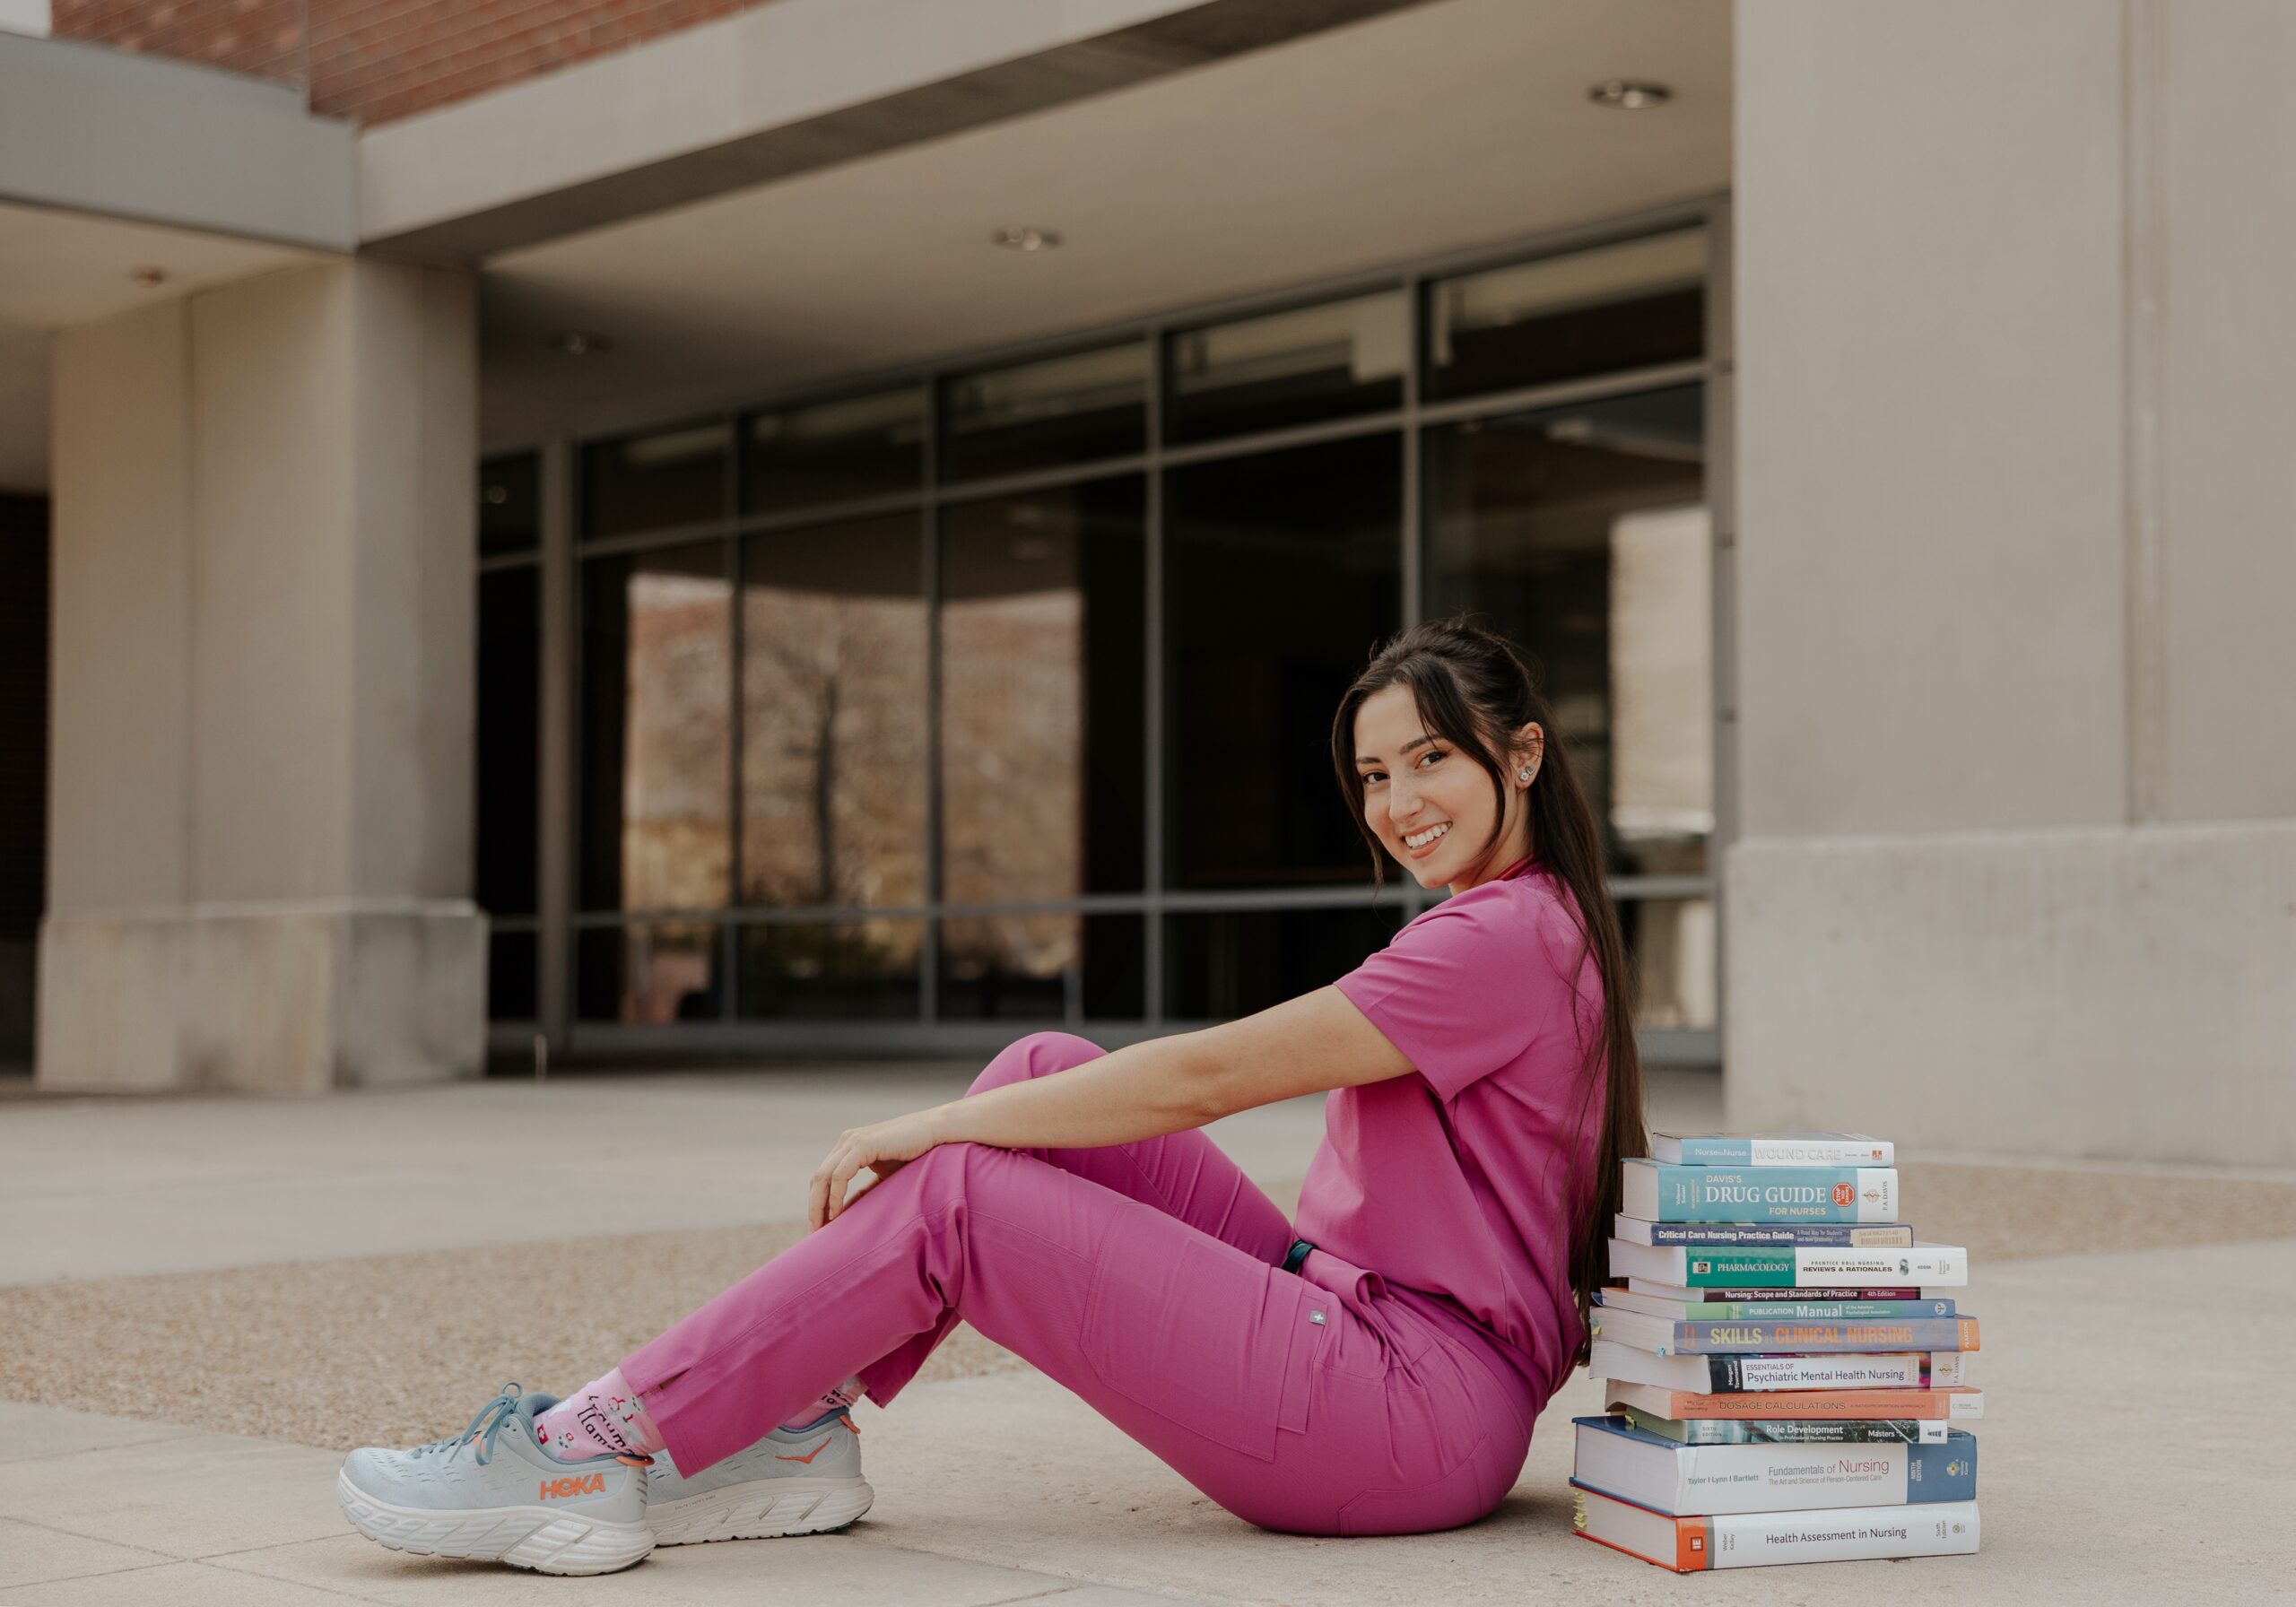 Nicolette Misbrenner poses on the Boise State campus with her textbooks